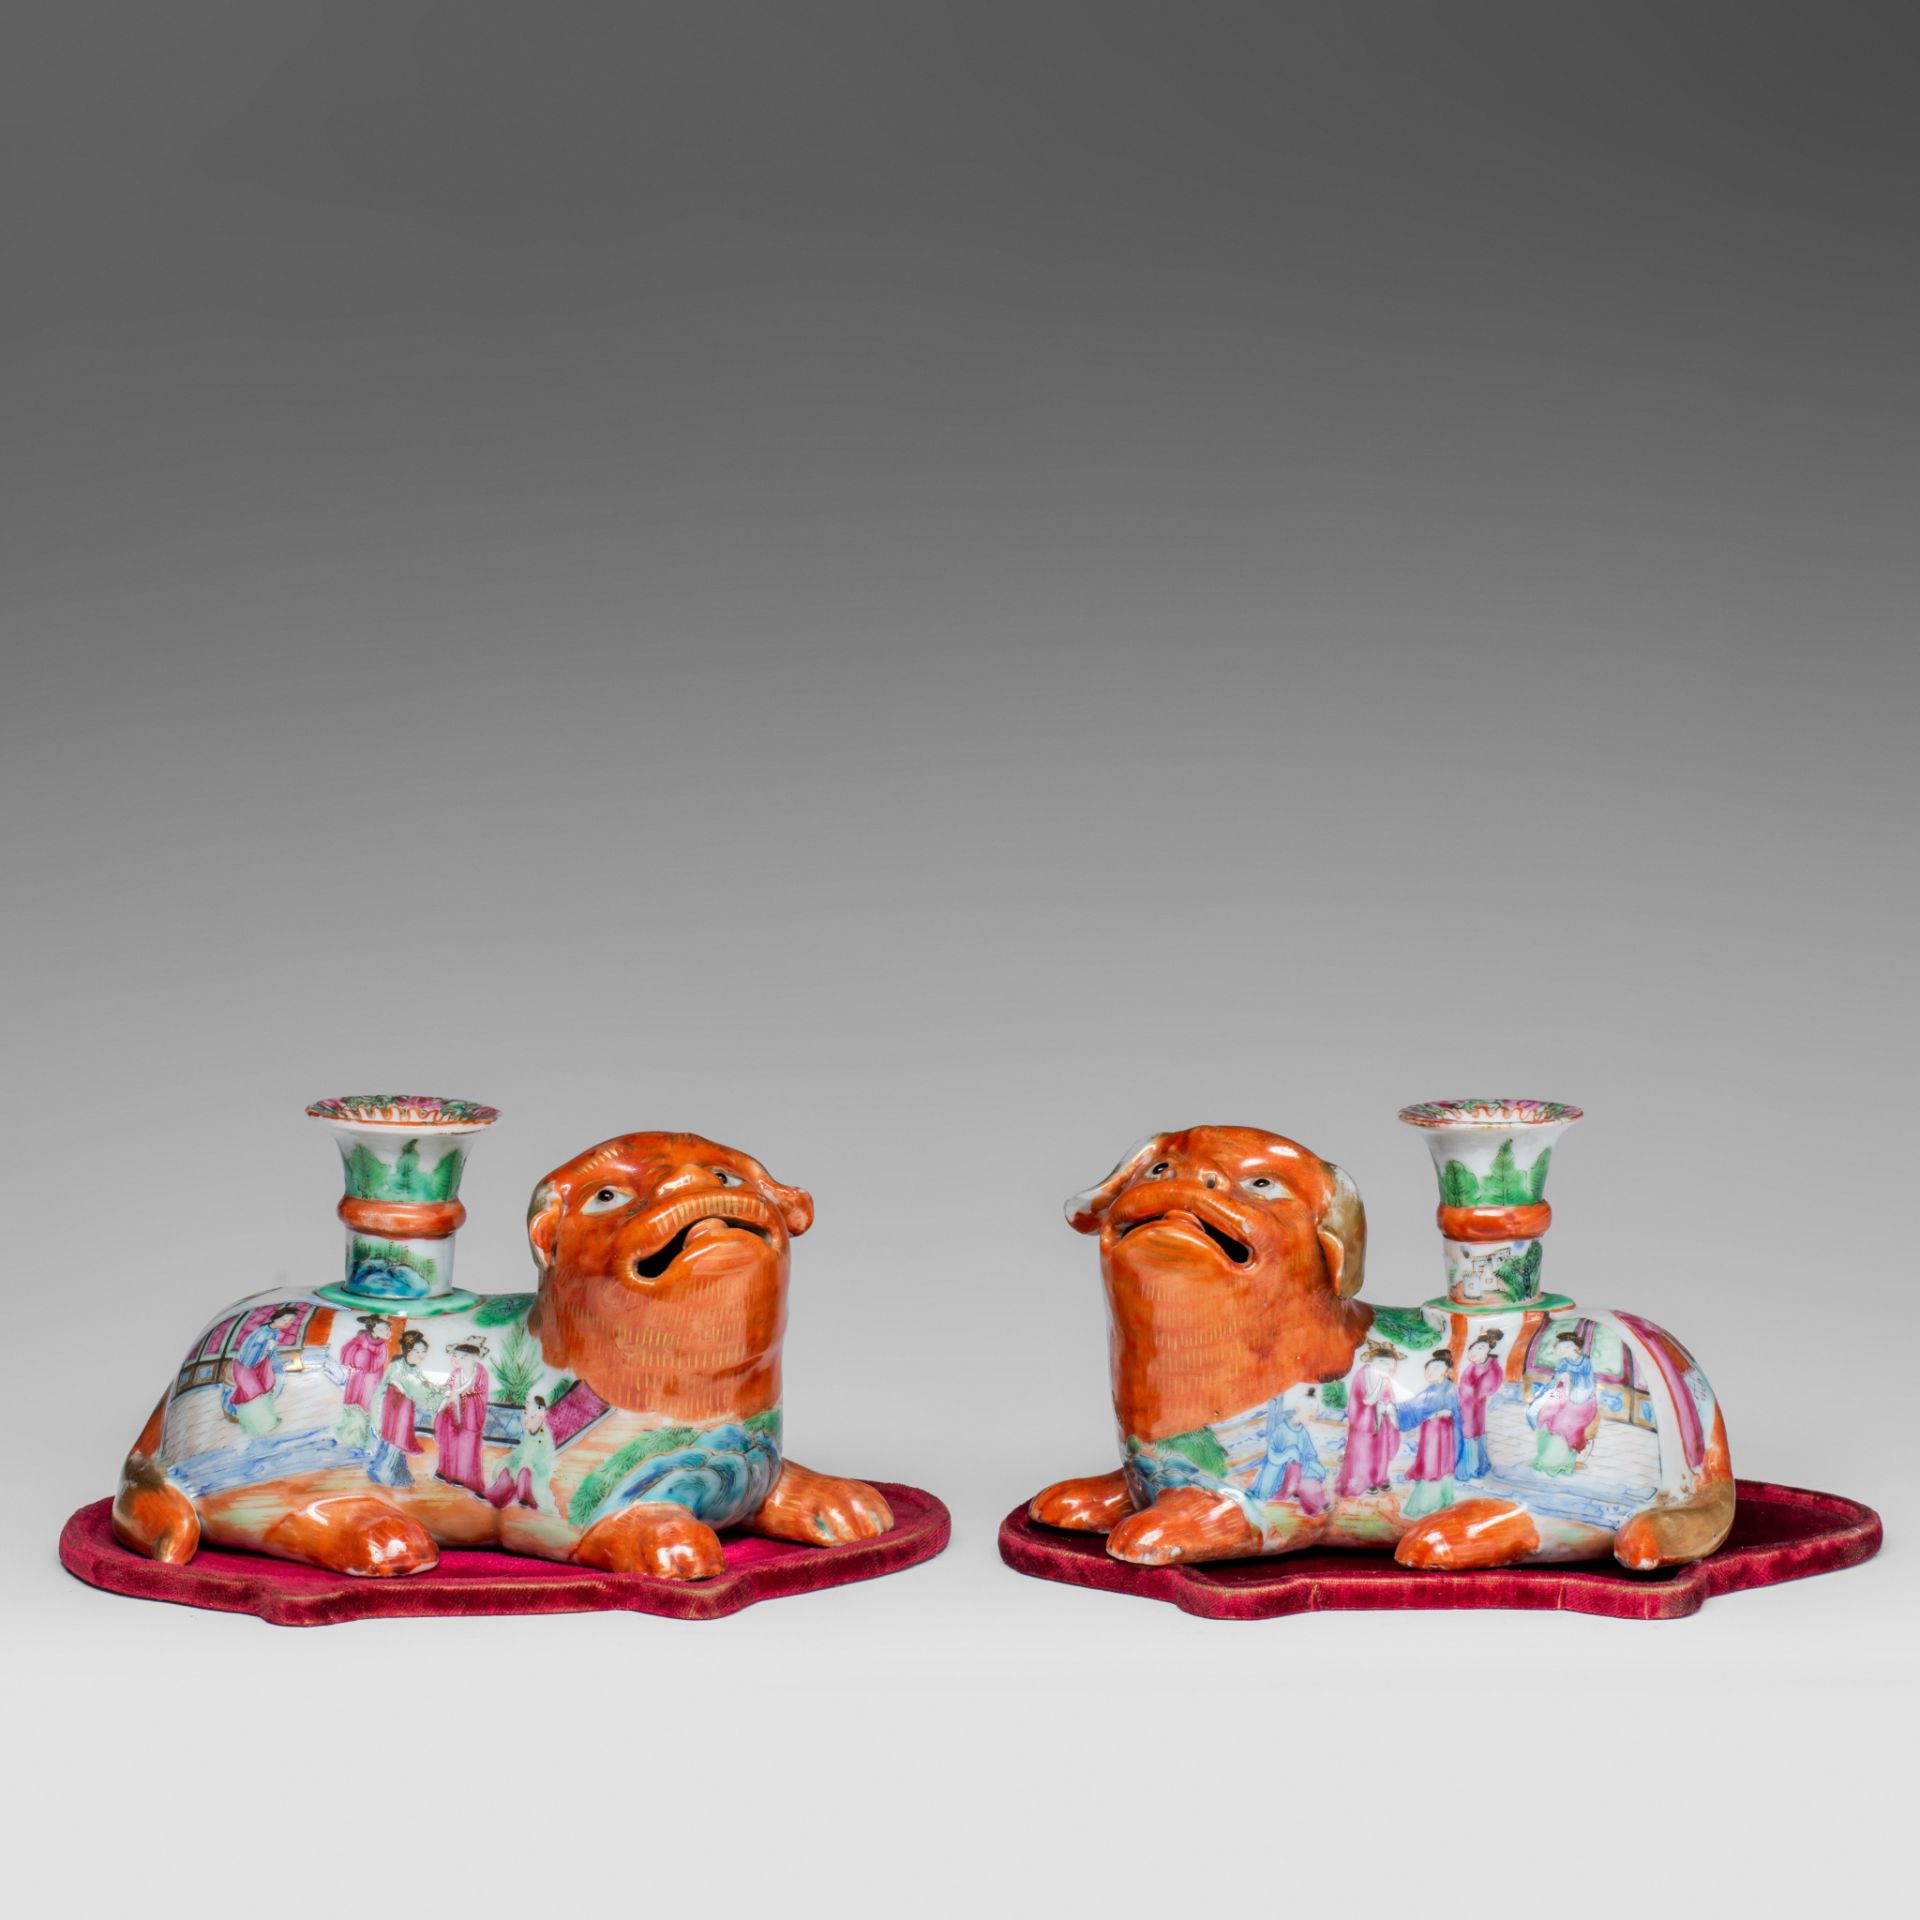 A fine pair of Chinese Canton joss stick holders in the shape of Fu dogs, 19thC, H 11,5 - L 20 cm